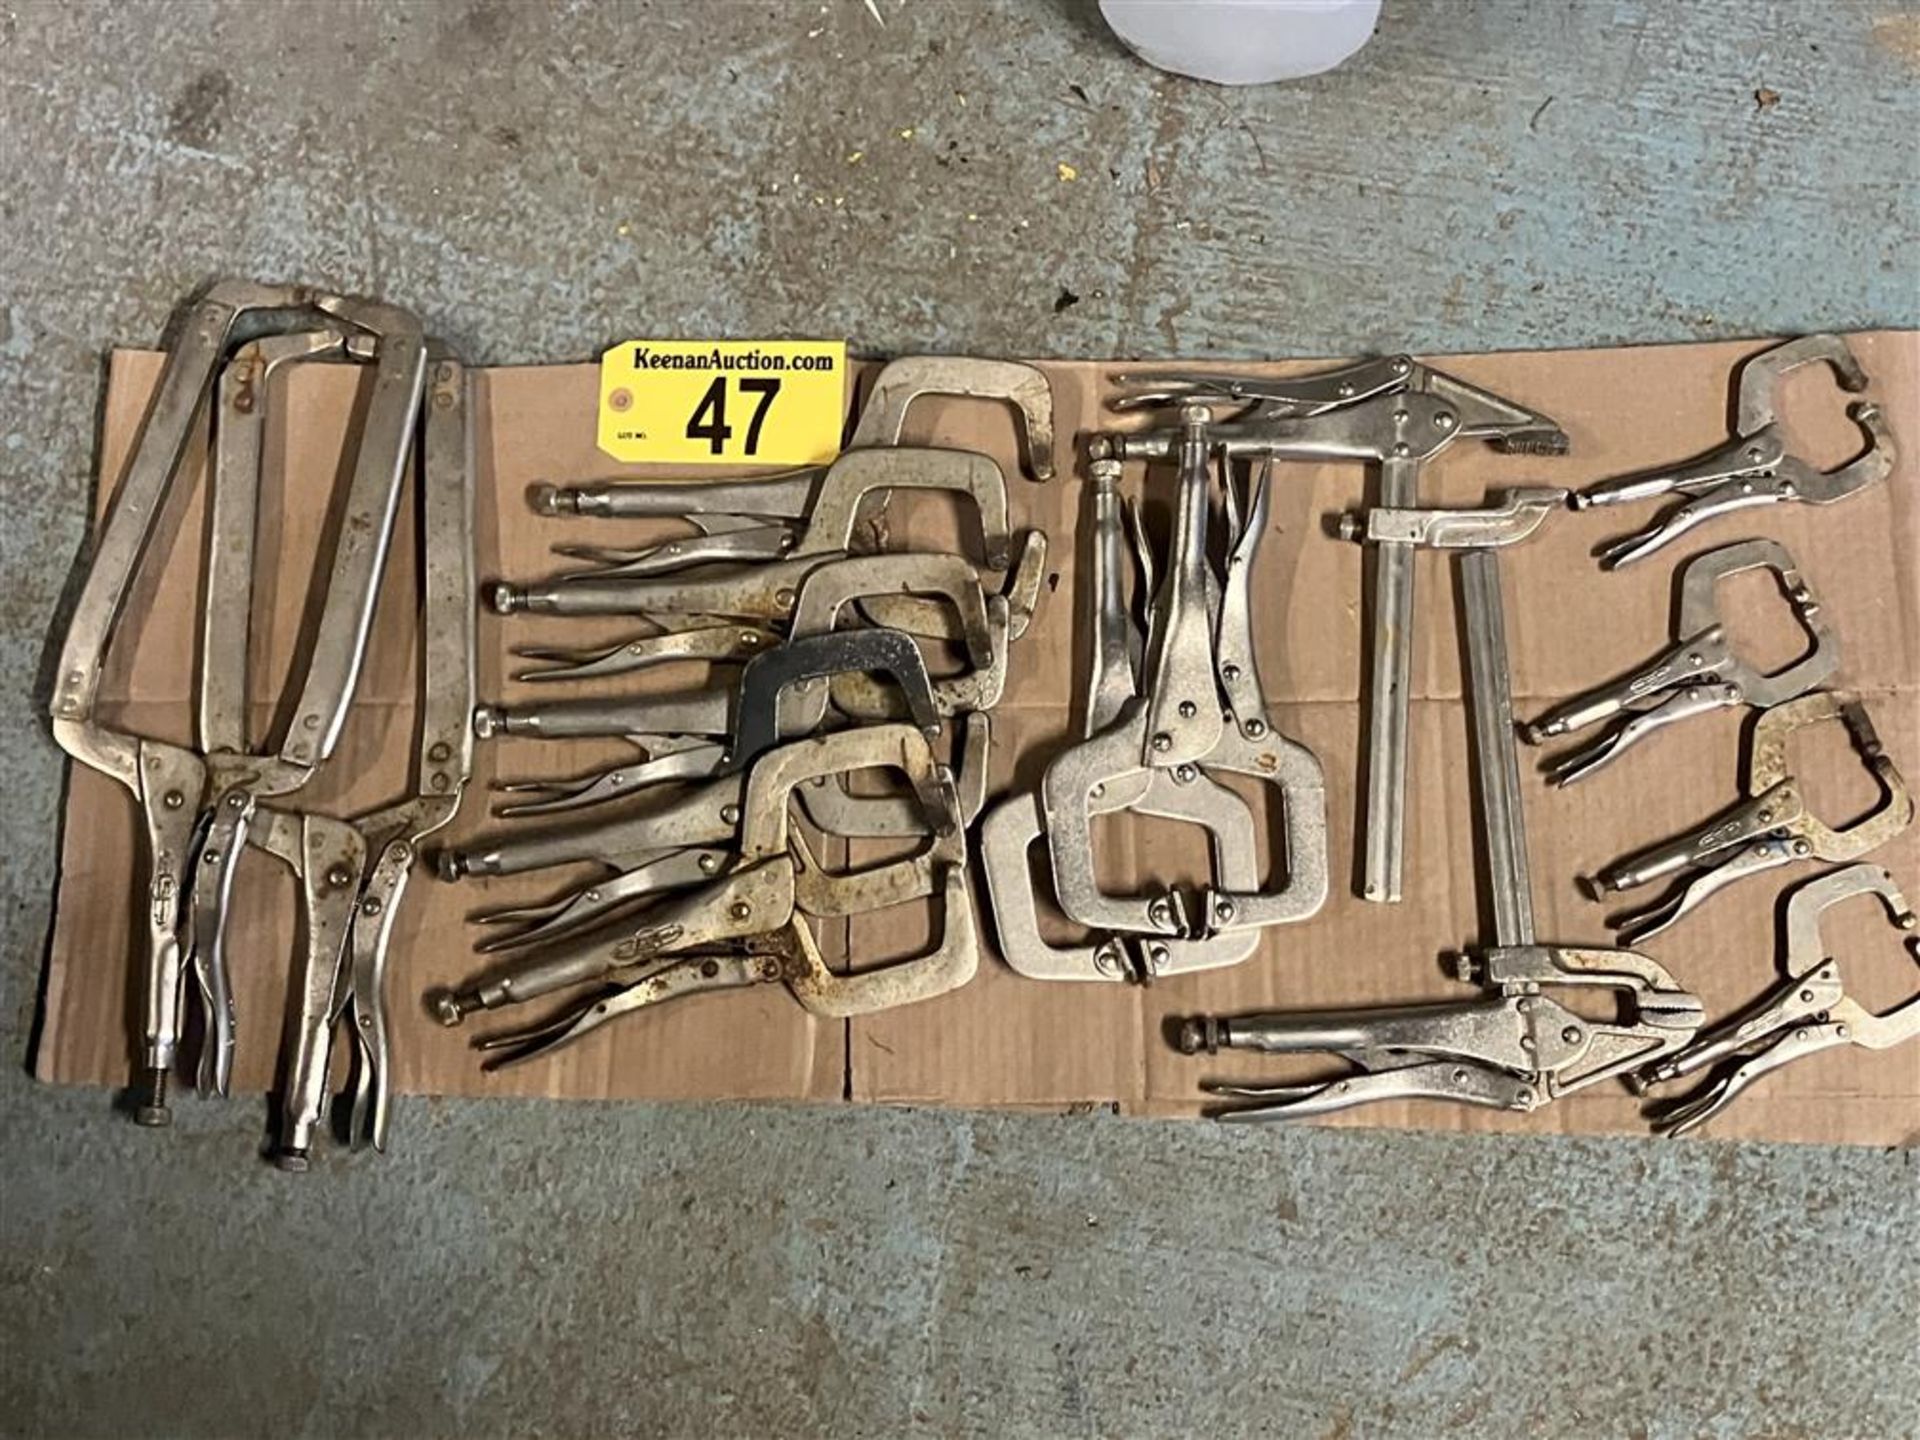 LOT OF VISE GRIP CLAMPS